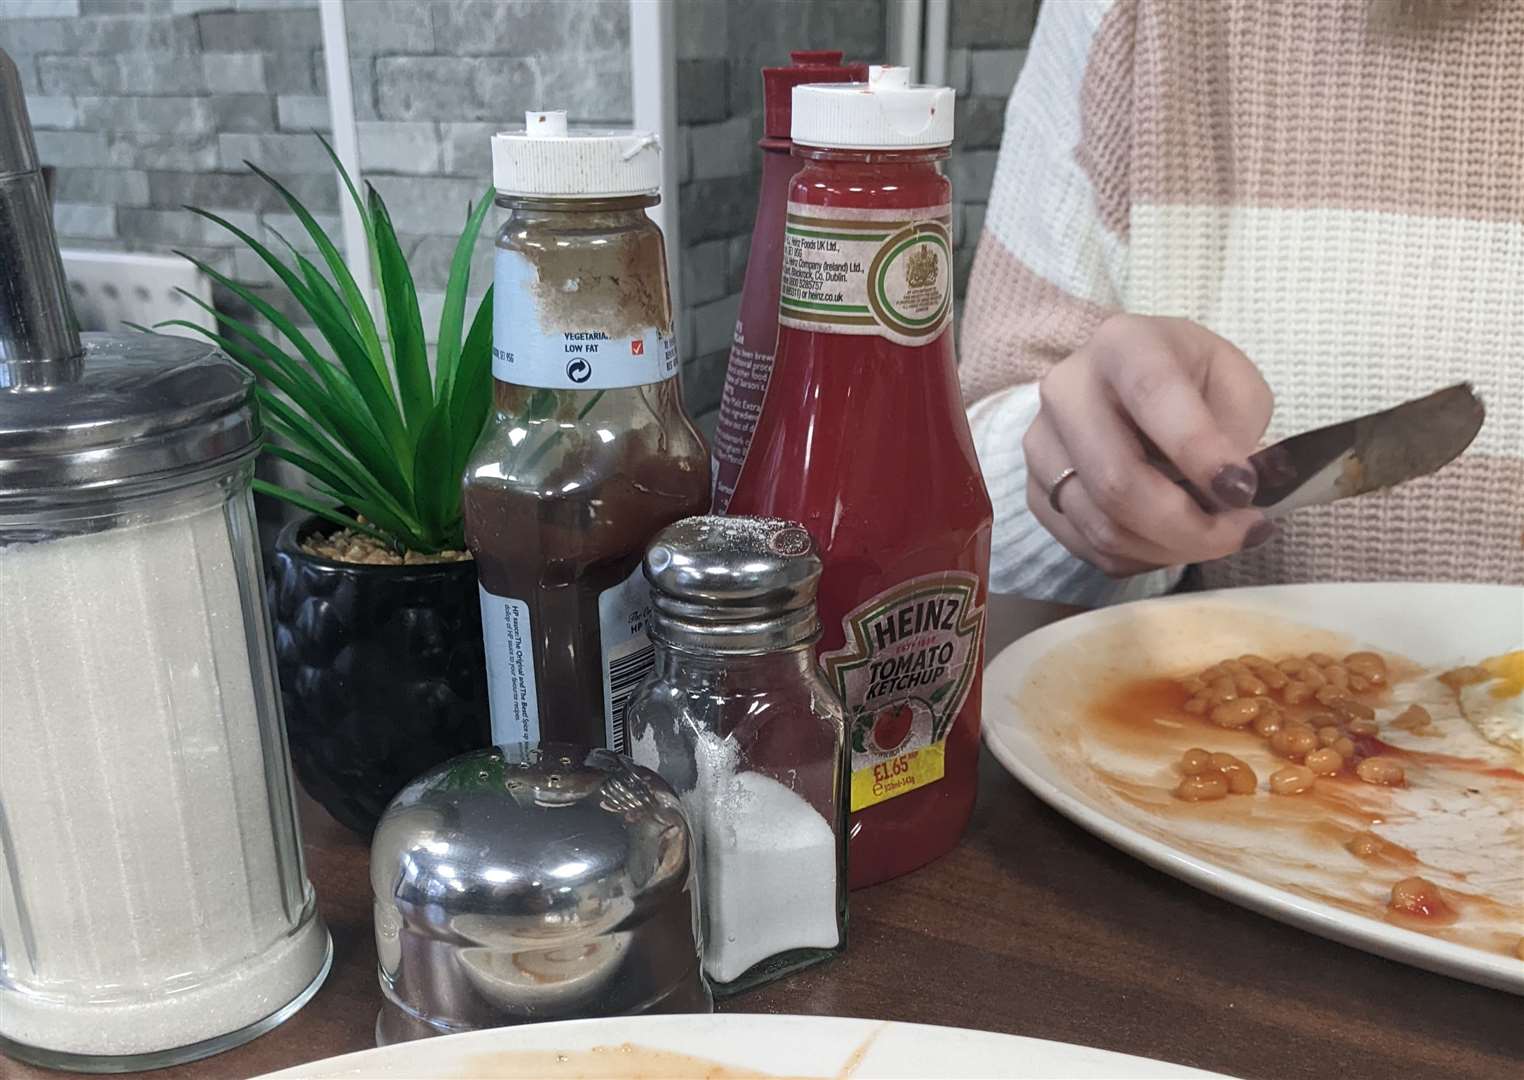 A rarely seen bottle of ketchup for unlimited use